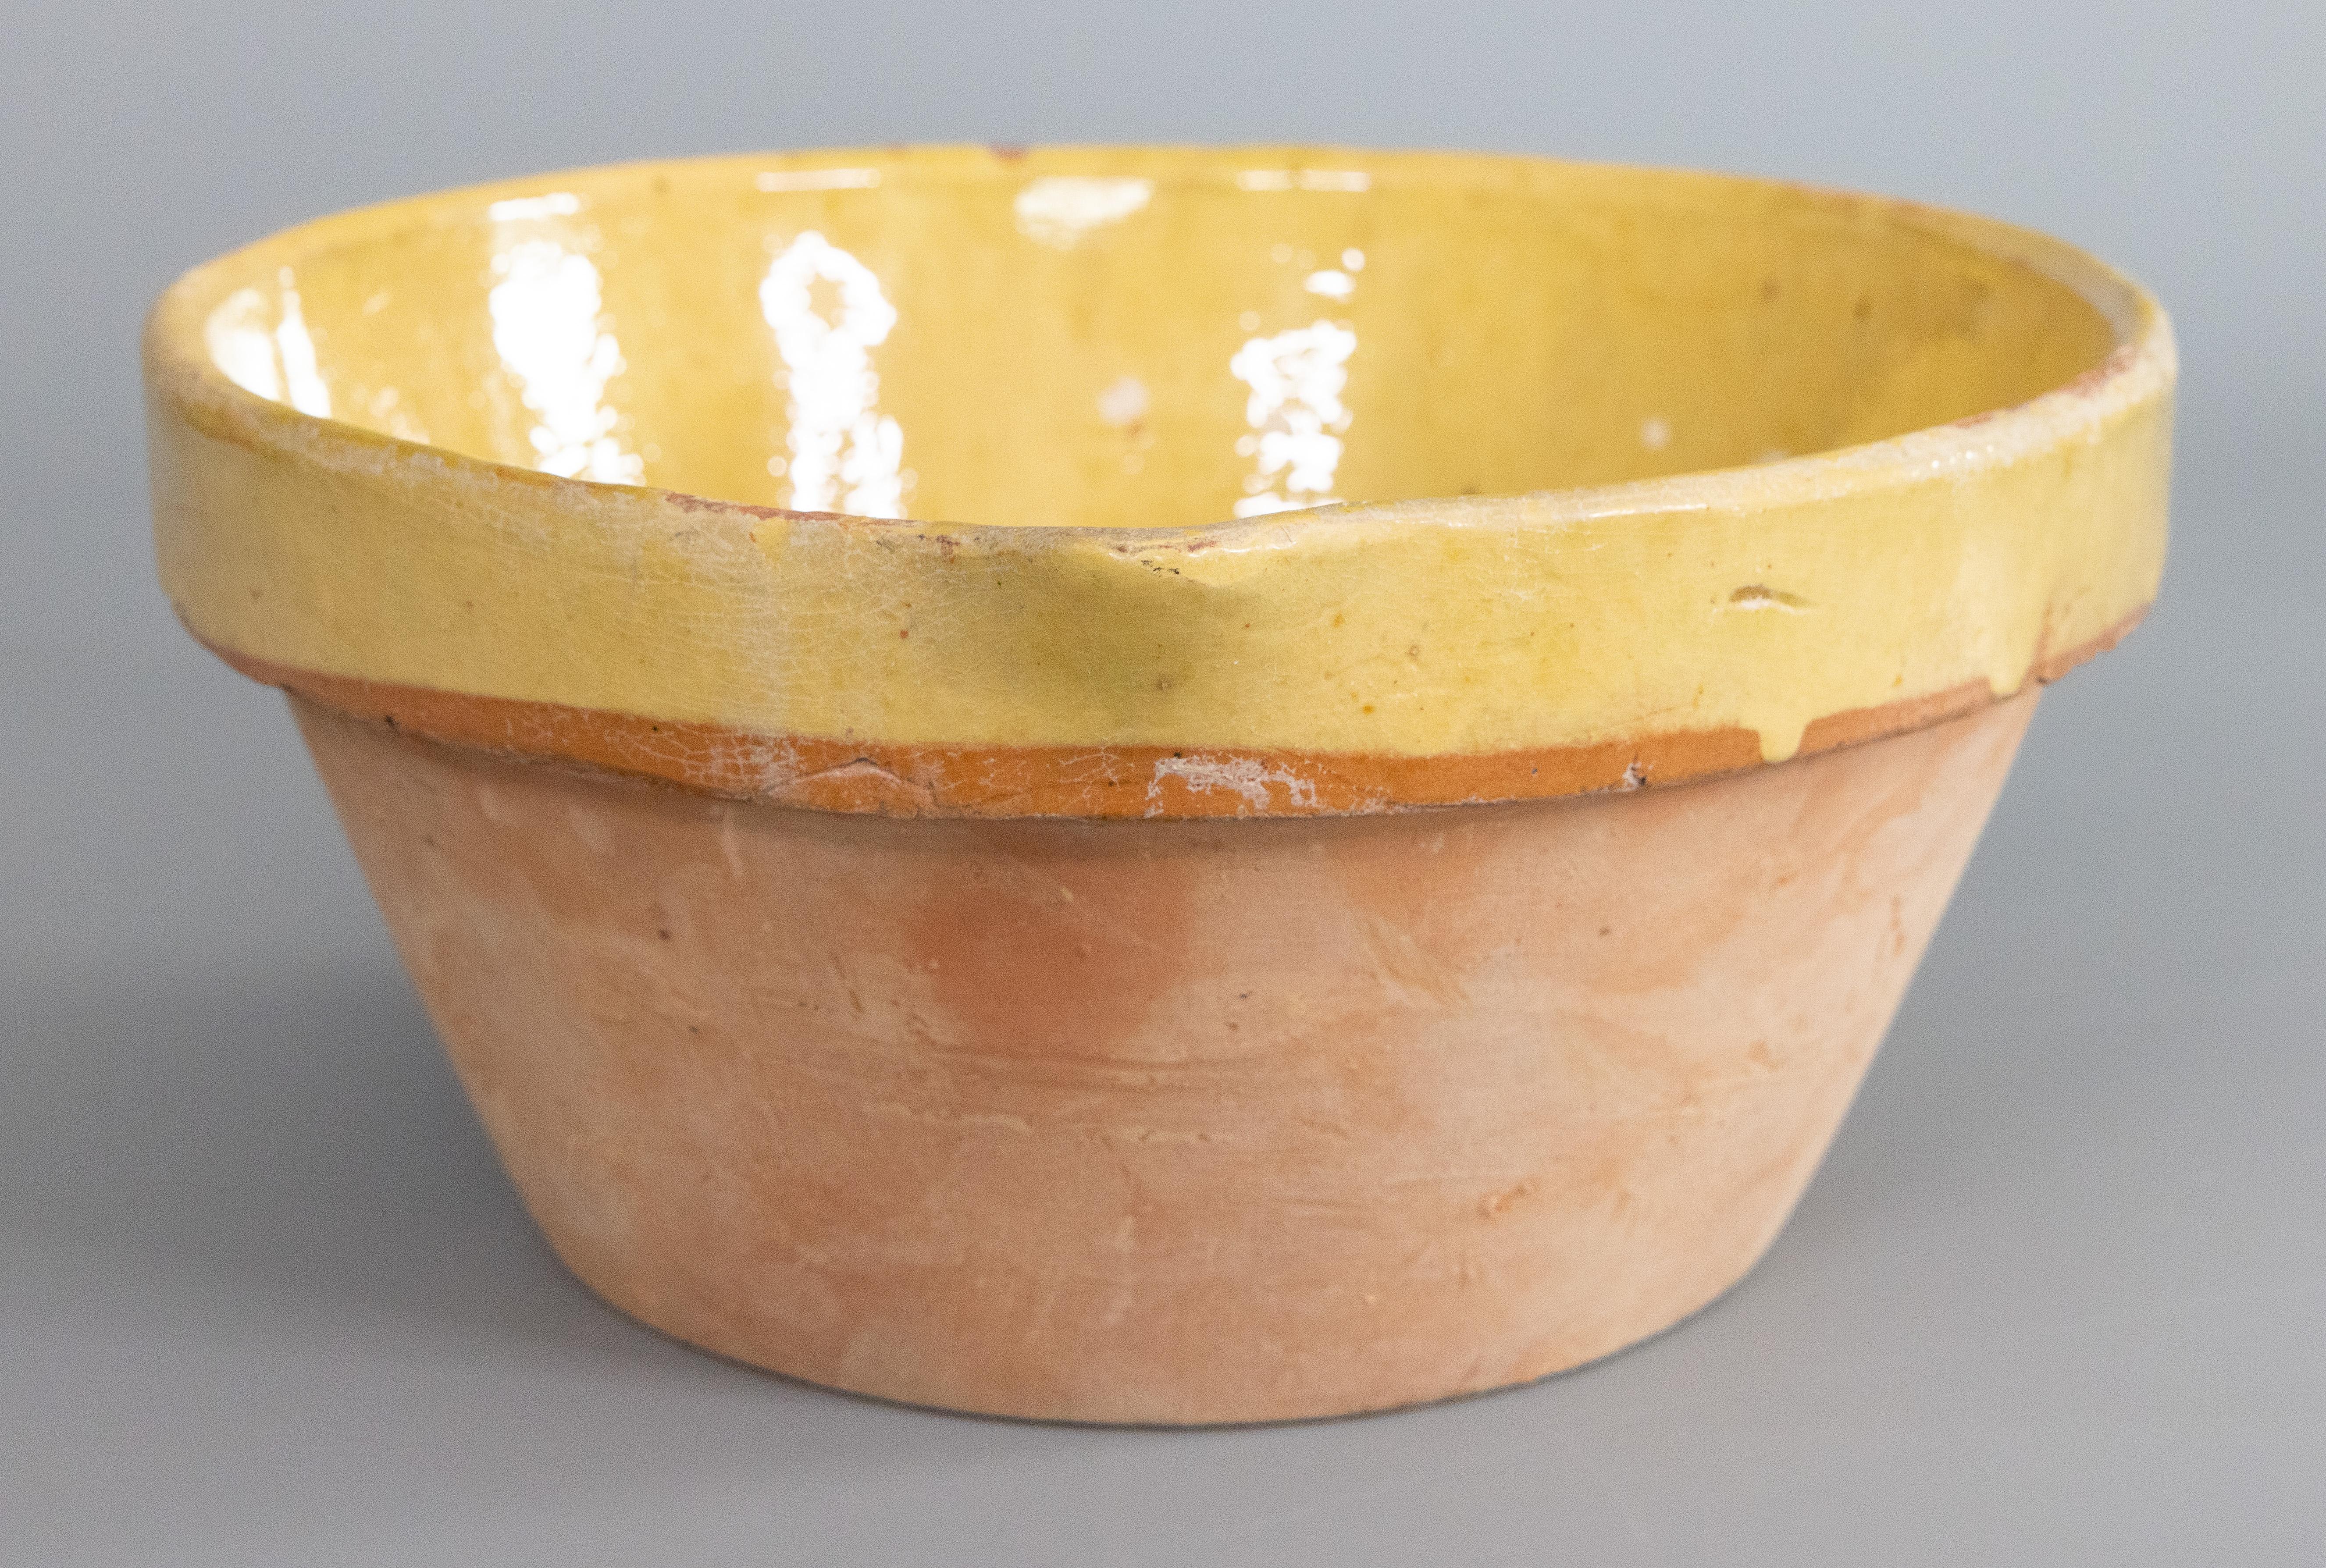 A lovely antique French Provincial yellow glazed terracotta tian or dairy bowl, circa 1900. These charming earthenware dishes originated in Provence and were used for mixing, cooking, and serving, going straight from the oven to the table. It would